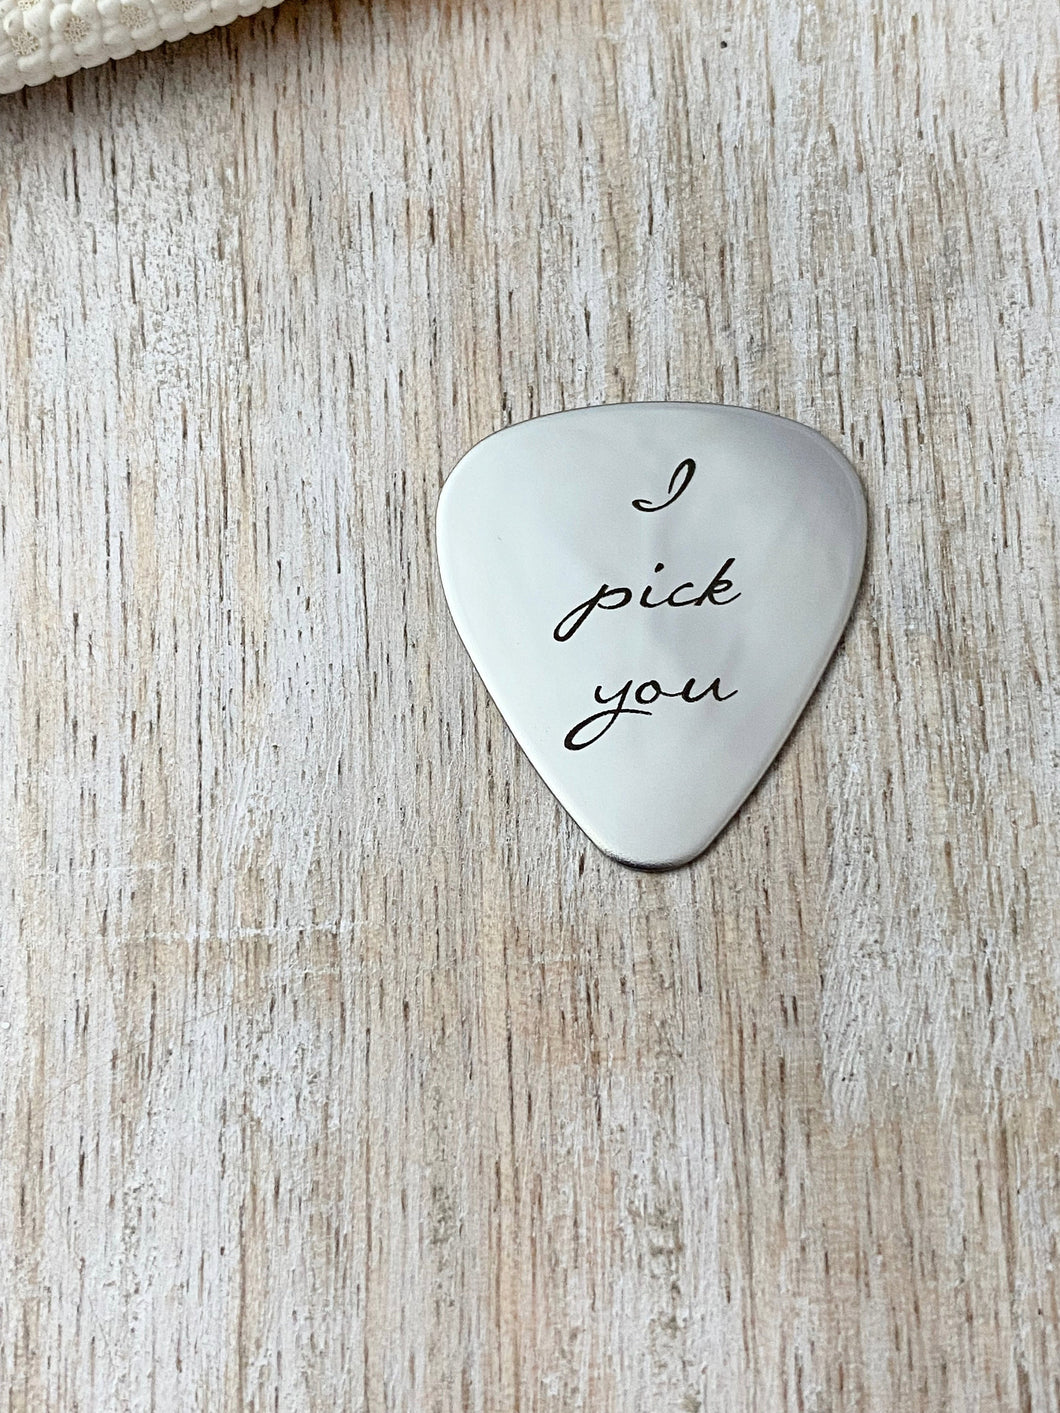 I pick you engraved guitar pick - Stainless steel - gift for him - Silver tone pick - gift for husband Valentine's Day gift